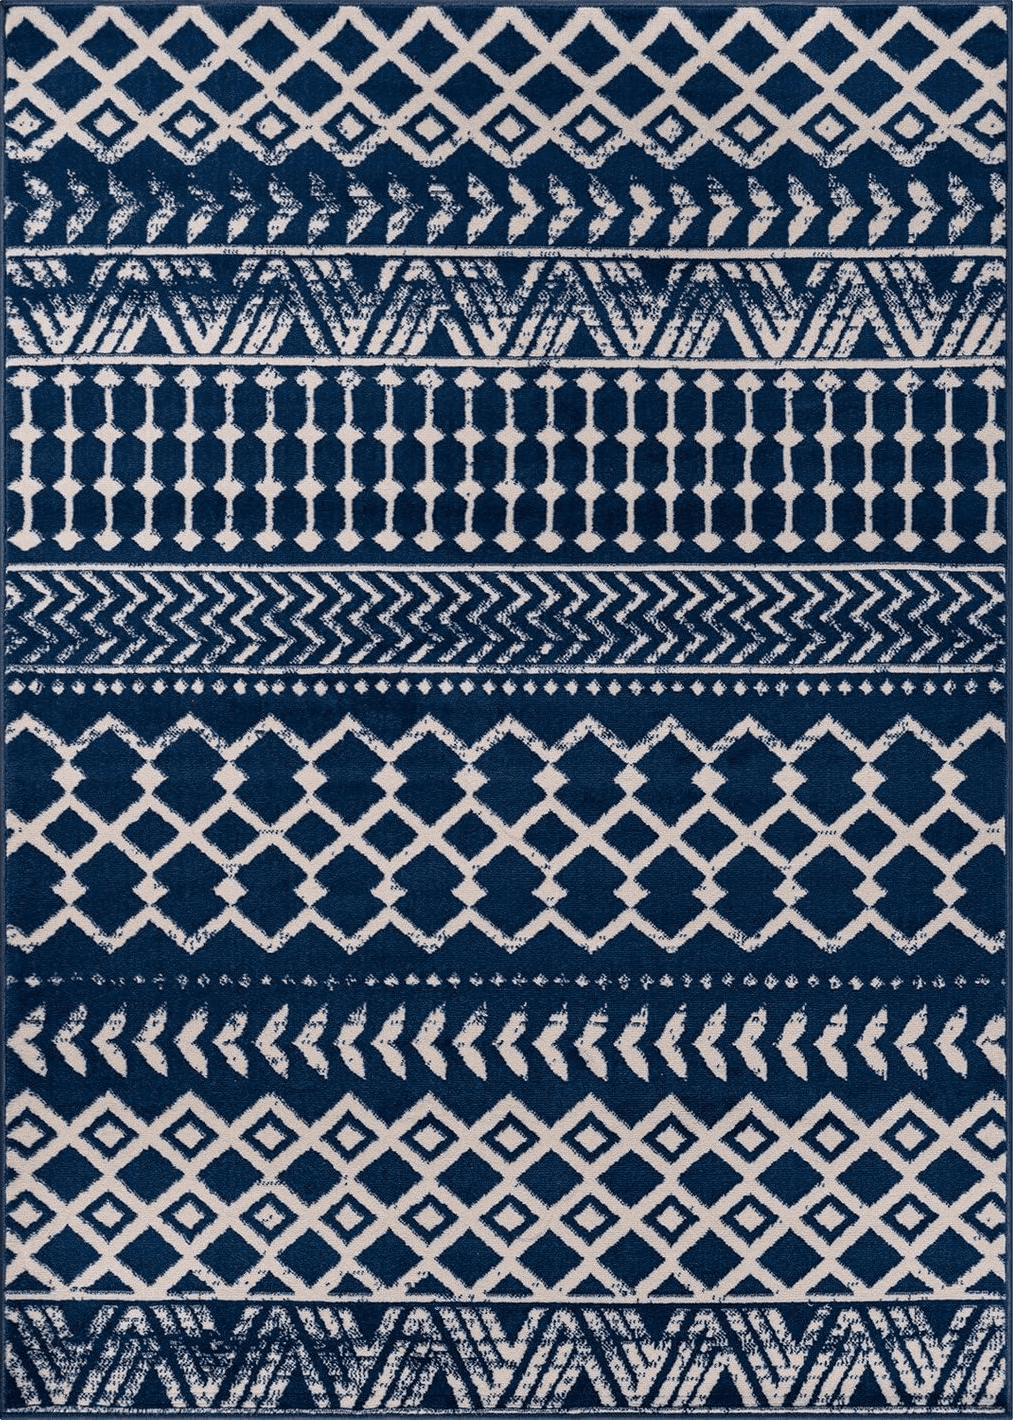 Bohemian White CAMILSON Boho Moroccan Area Rug, 6'7"x9' Geometric, Diamond Design for Living Room Bedroom Easy-Cleaning Non-Shedding Navy Blue/Cream Indoor Area Rugs Bohemian (6x9)